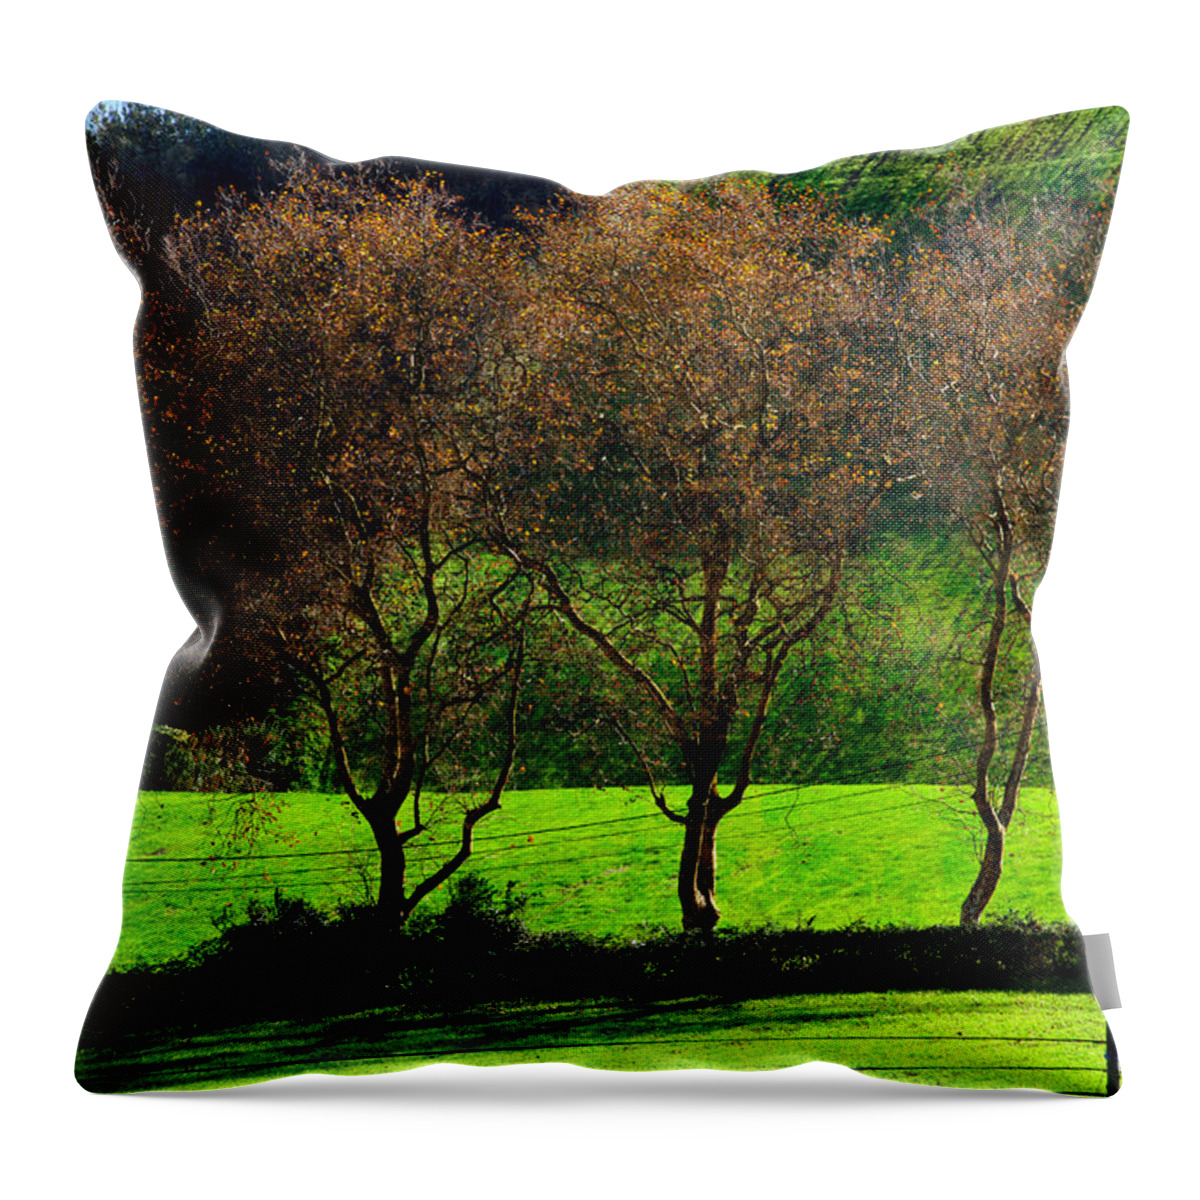 Azores Throw Pillow featuring the photograph Fine Art Colour-191 by Joseph Amaral